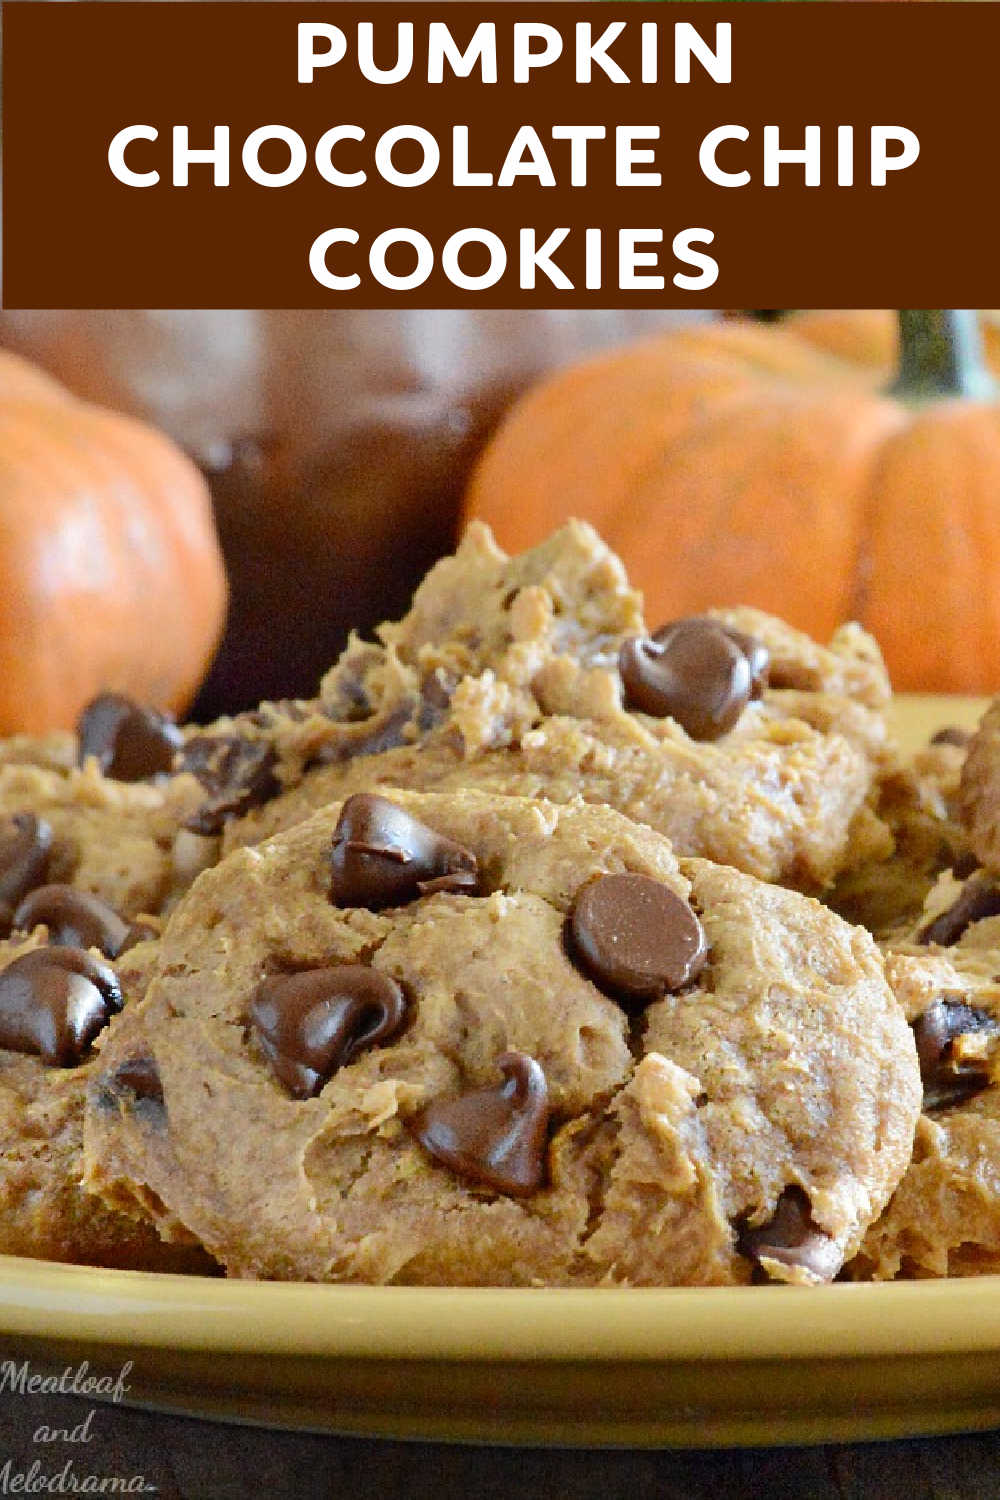 Make Pumpkin Chocolate Chip Cookies with spice cake mix and pumpkin puree! These cake mix cookies are soft, cakey and perfect for fall baking. Best of all, you only need 5 ingredients to make them! via @meamel